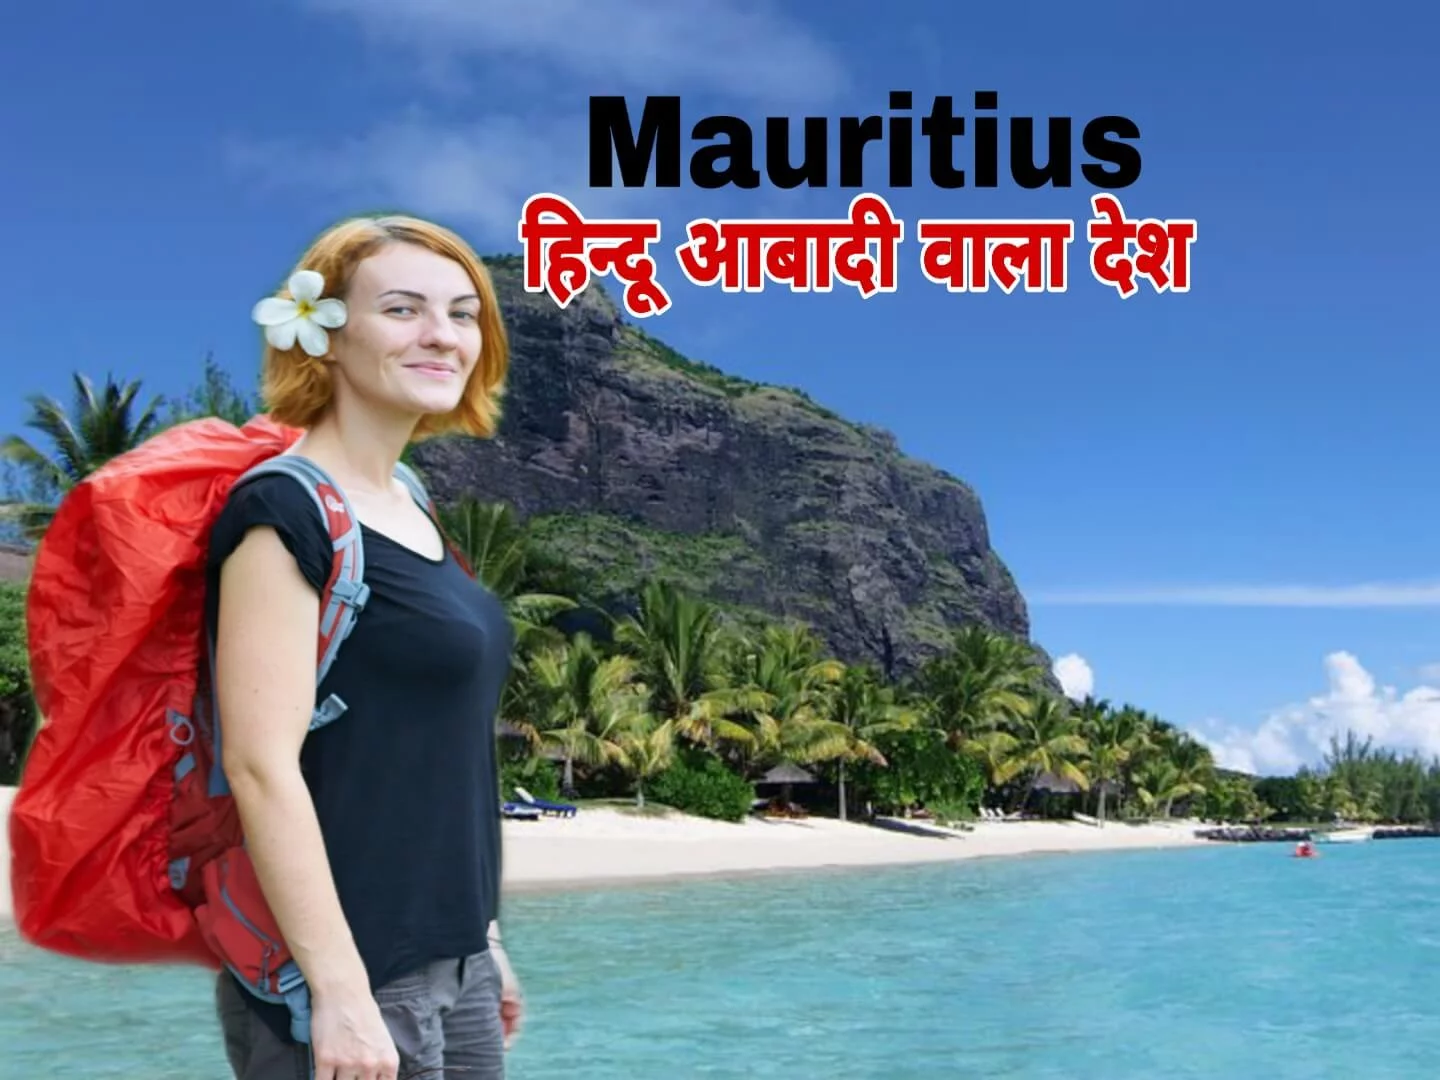 Mauritius Facts in Hindi,मॉरीशस देश के बारे में 15 रोचक तथ्य Amazing Facts about Mauritius in Hindi